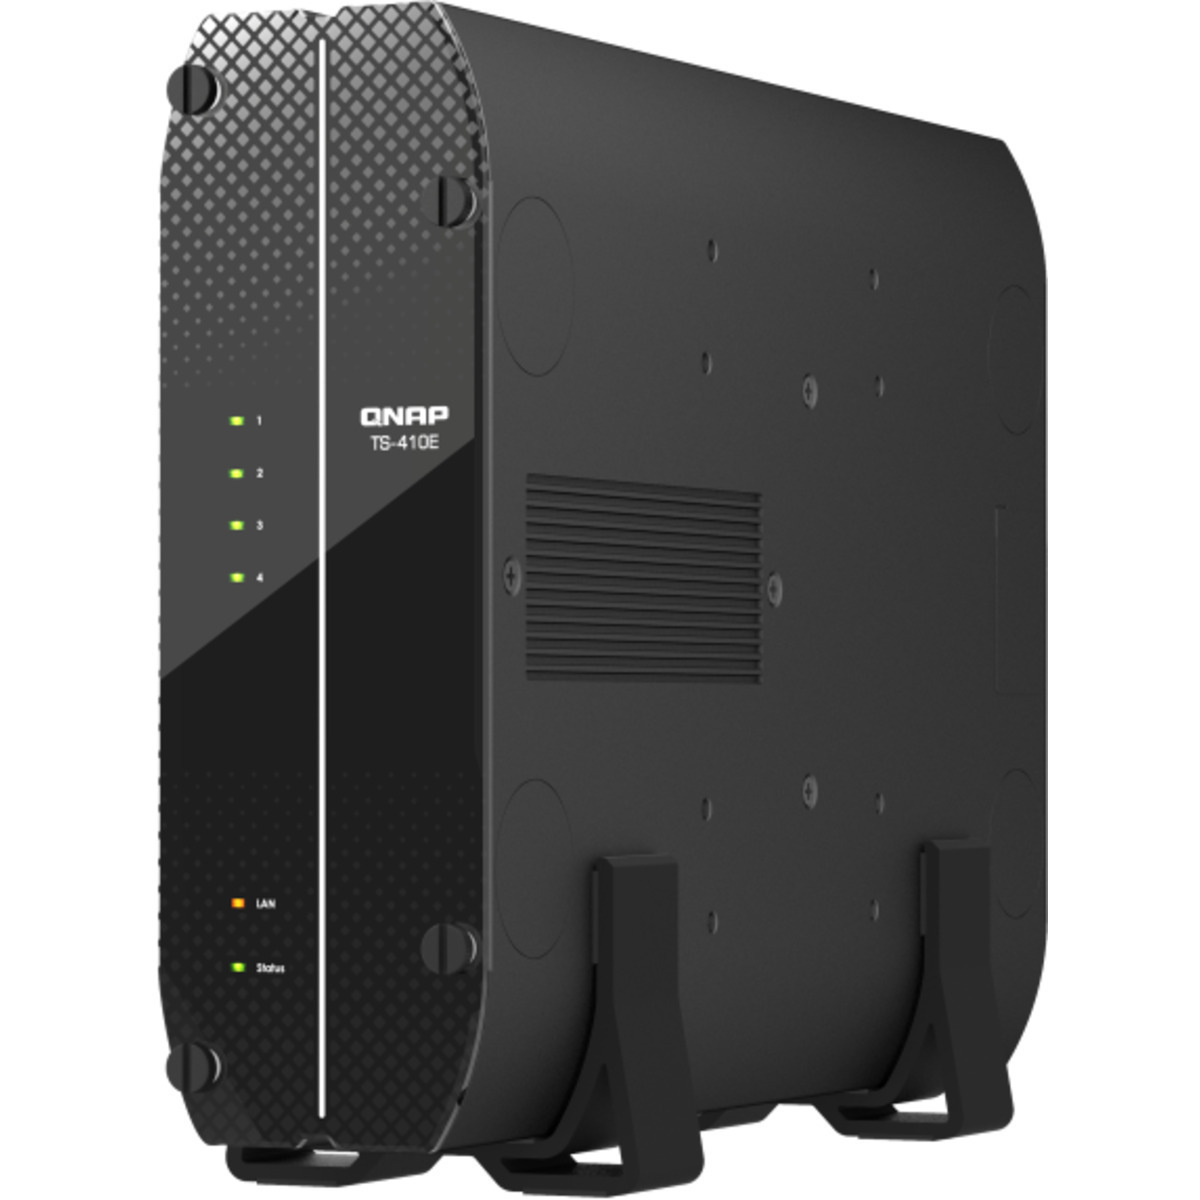 QNAP TS-410E 8tb 4-Bay Desktop Multimedia / Power User / Business NAS - Network Attached Storage Device 4x2tb Sandisk Ultra 3D SDSSDH3-2T00 2.5 560/520MB/s SATA 6Gb/s SSD CONSUMER Class Drives Installed - Burn-In Tested TS-410E